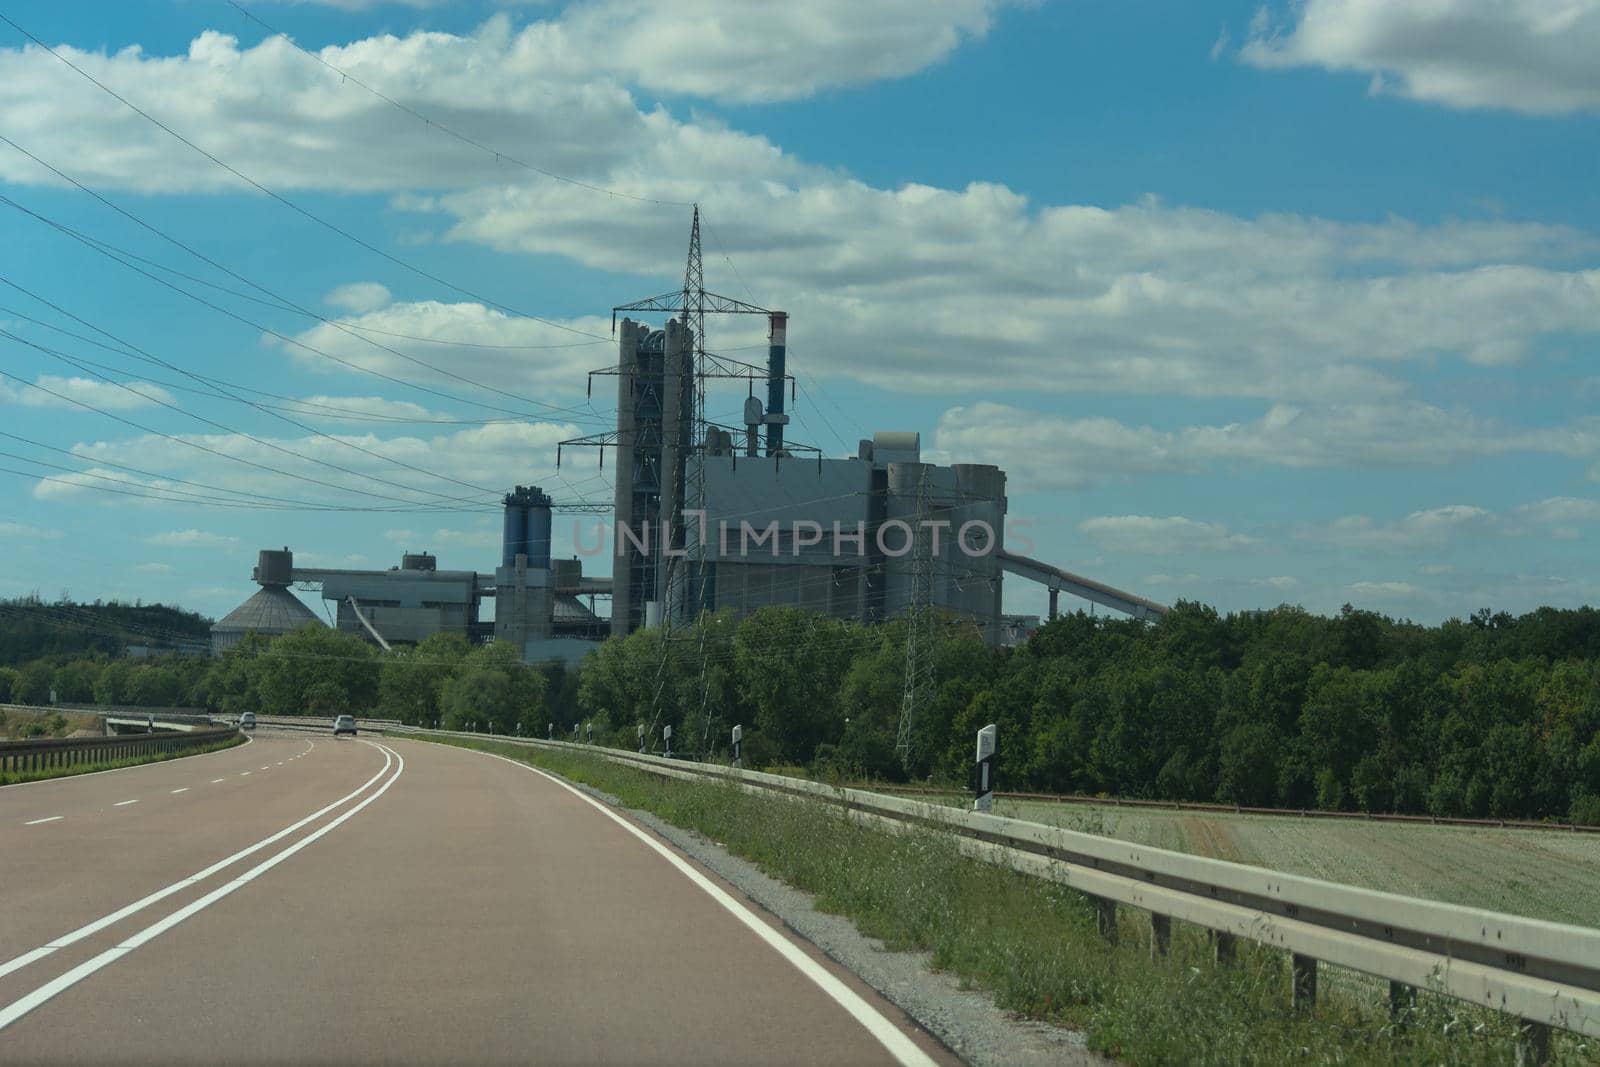 The road to the nuclear power plant by JFsPic